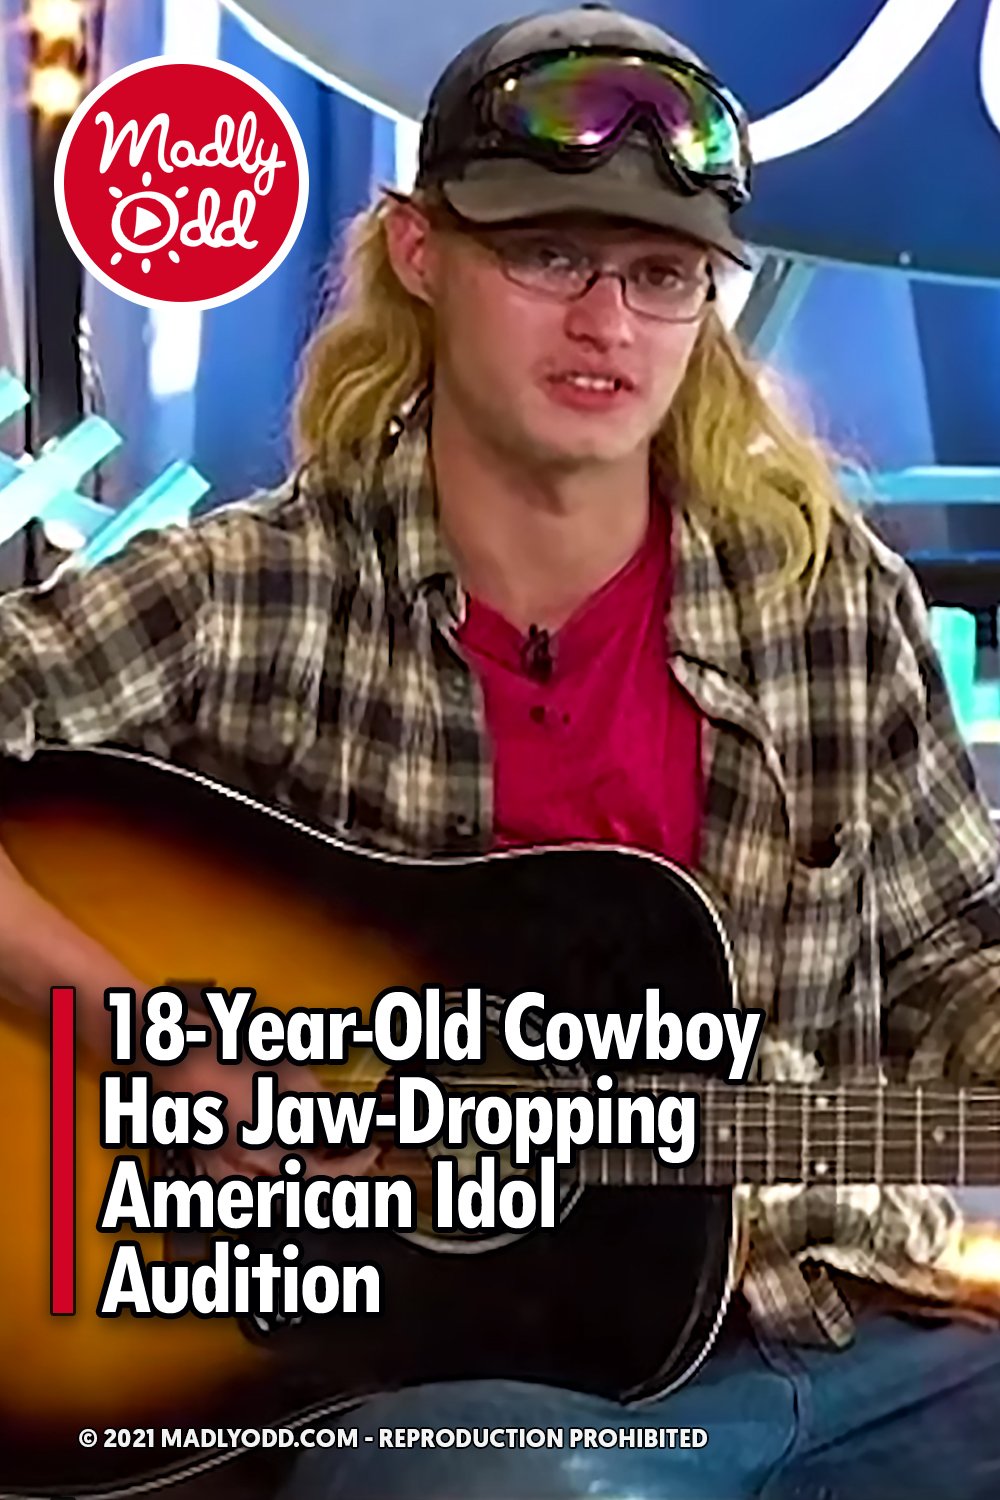 18-Year-Old Cowboy Has Jaw-Dropping American Idol Audition